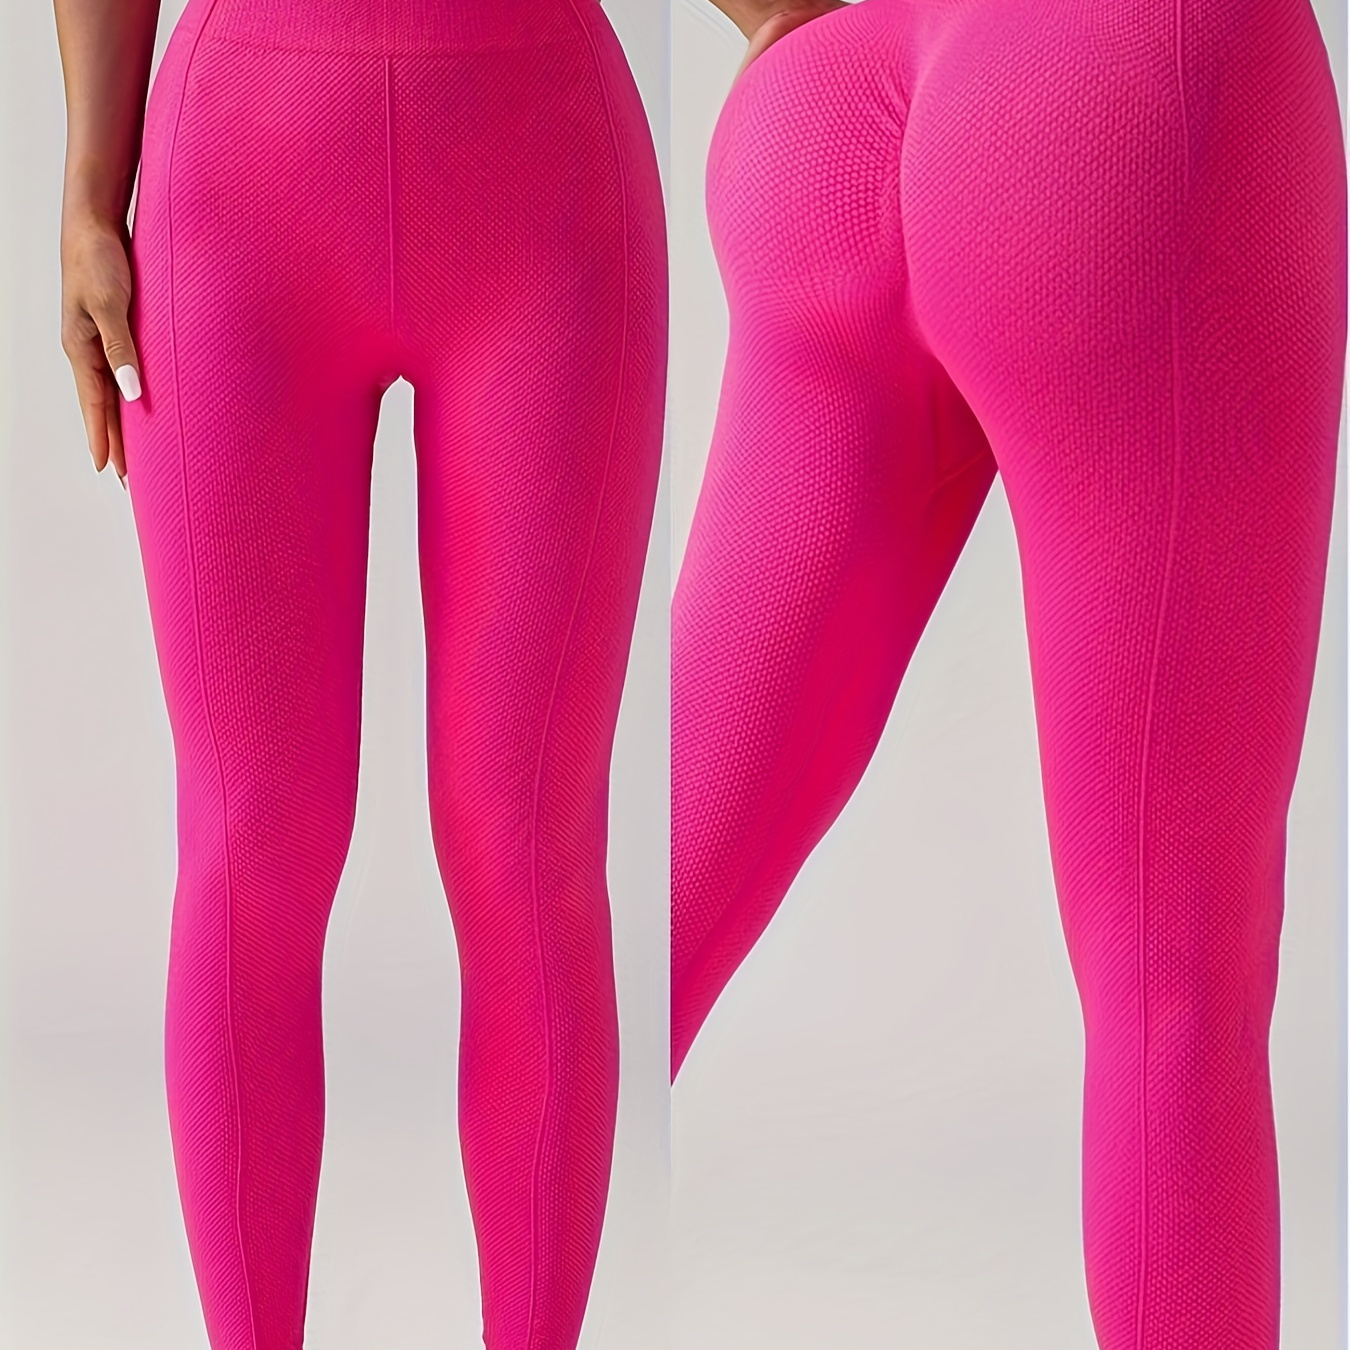 

Women's High-waist Seamless Sports Leggings, Fitness Yoga Pants With Booty Lift, Slimming Workout Tights, Stretchy Athletic Peach Hip Activewear, Gym Wear